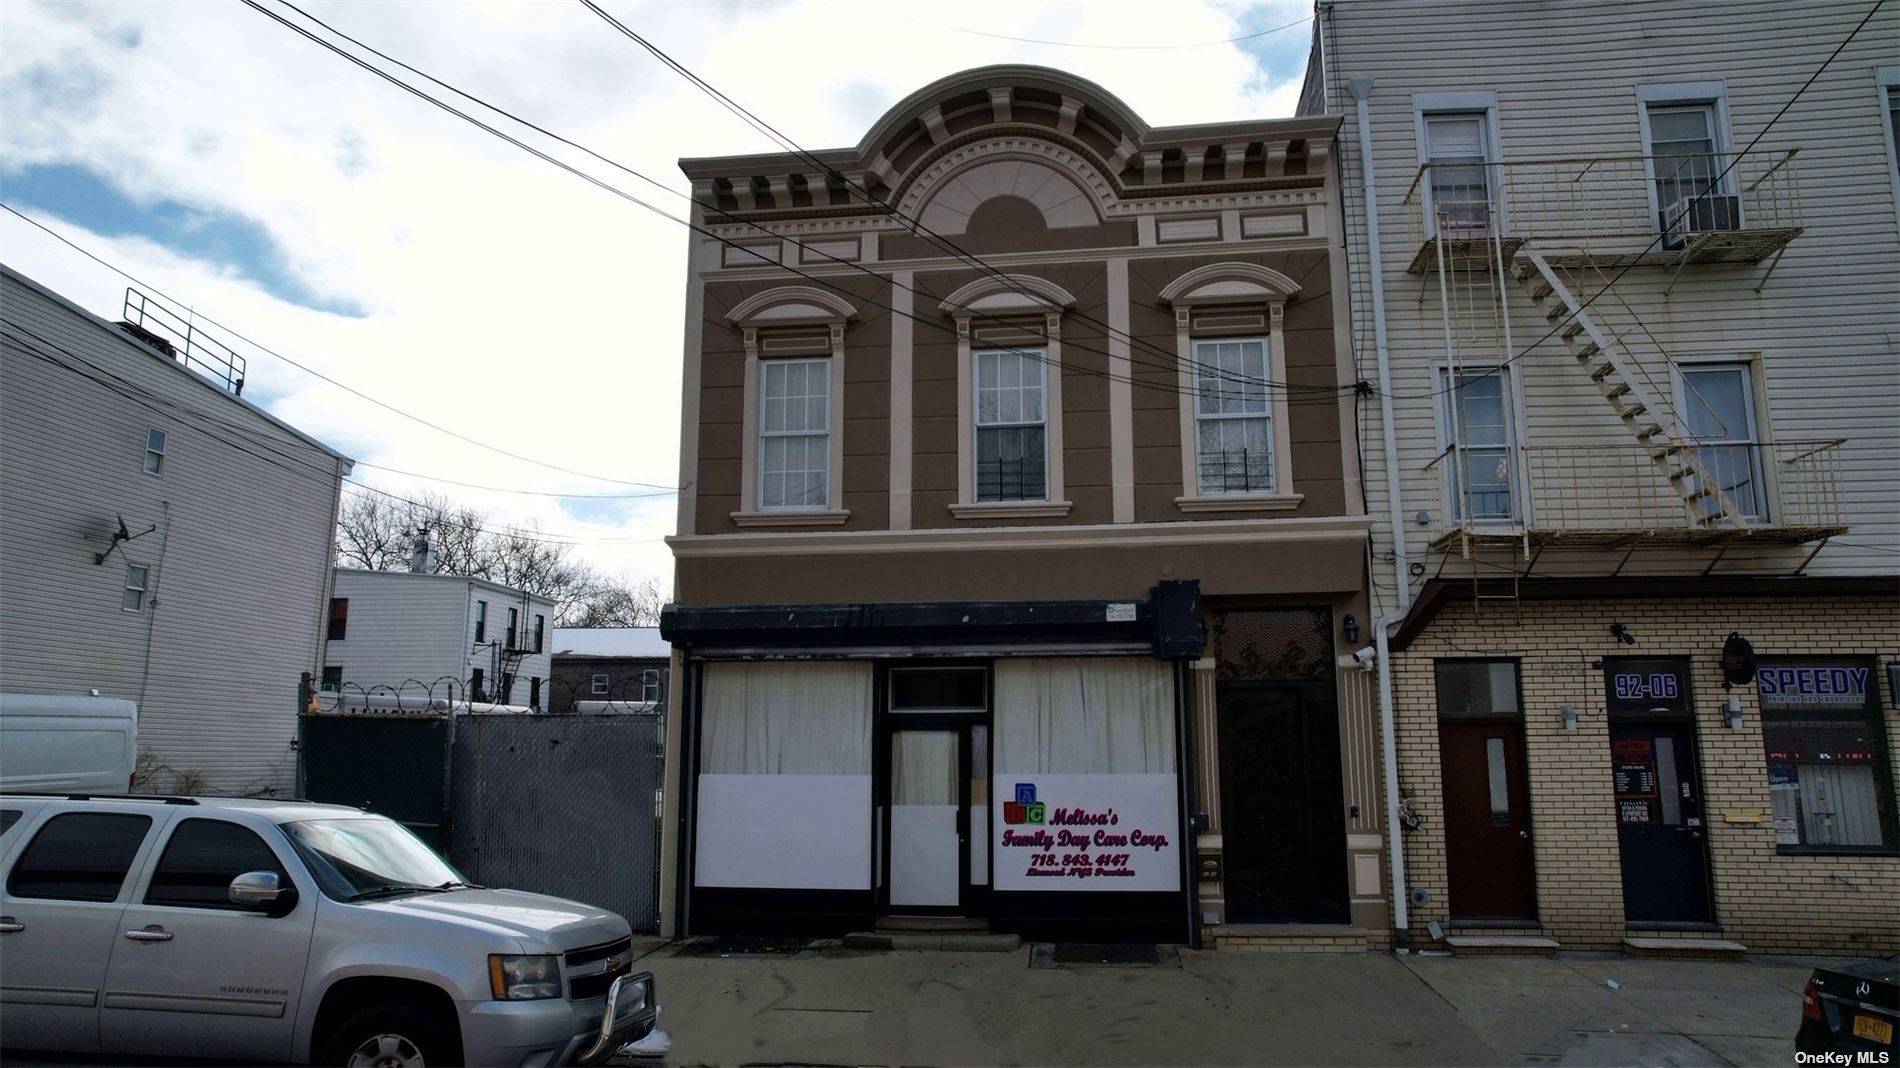 Totally renovated mixed use building with central air, situated 1 block west off Woodhaven Blvd, only a few blocks to the Liberty Ave Subway line at Cross Bay Blvd.